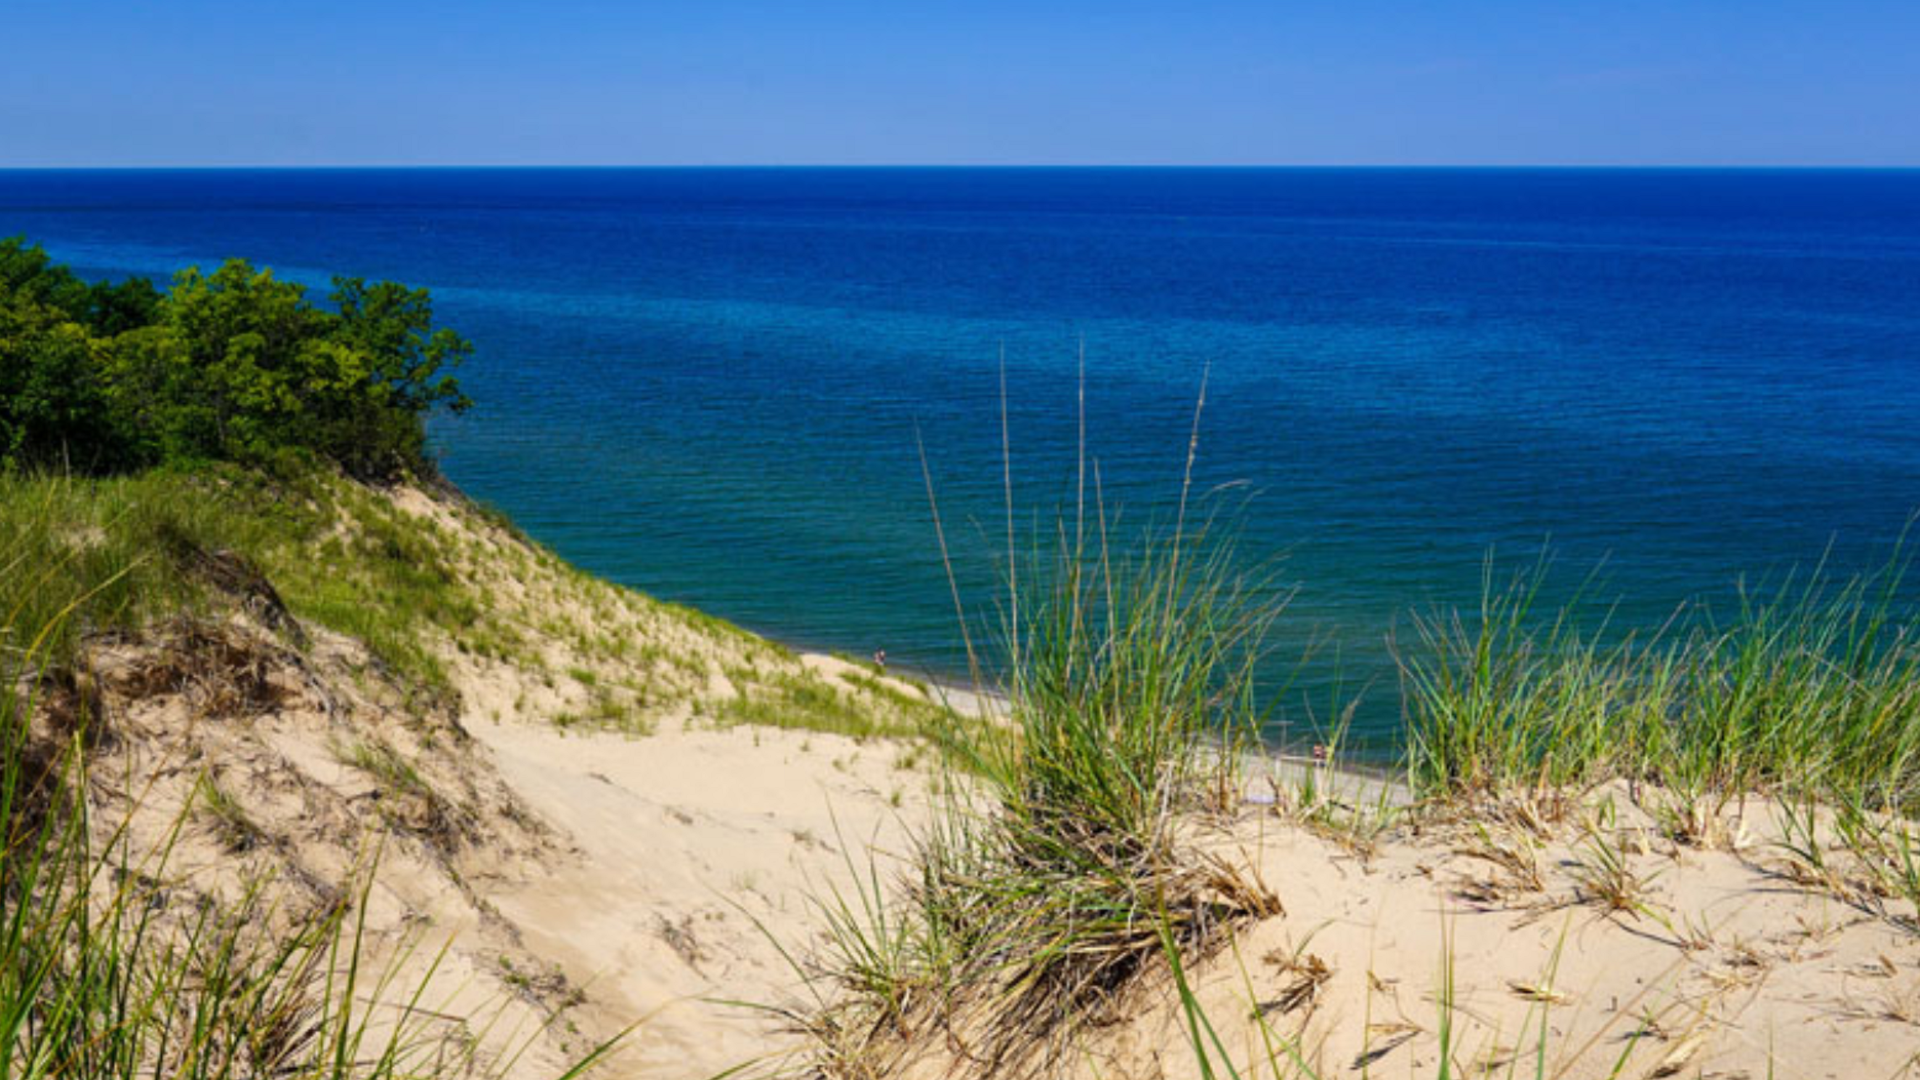 A lot of families cool off in the summer by heading to the Indiana Dunes. But soon they may have to pay to get into the park.